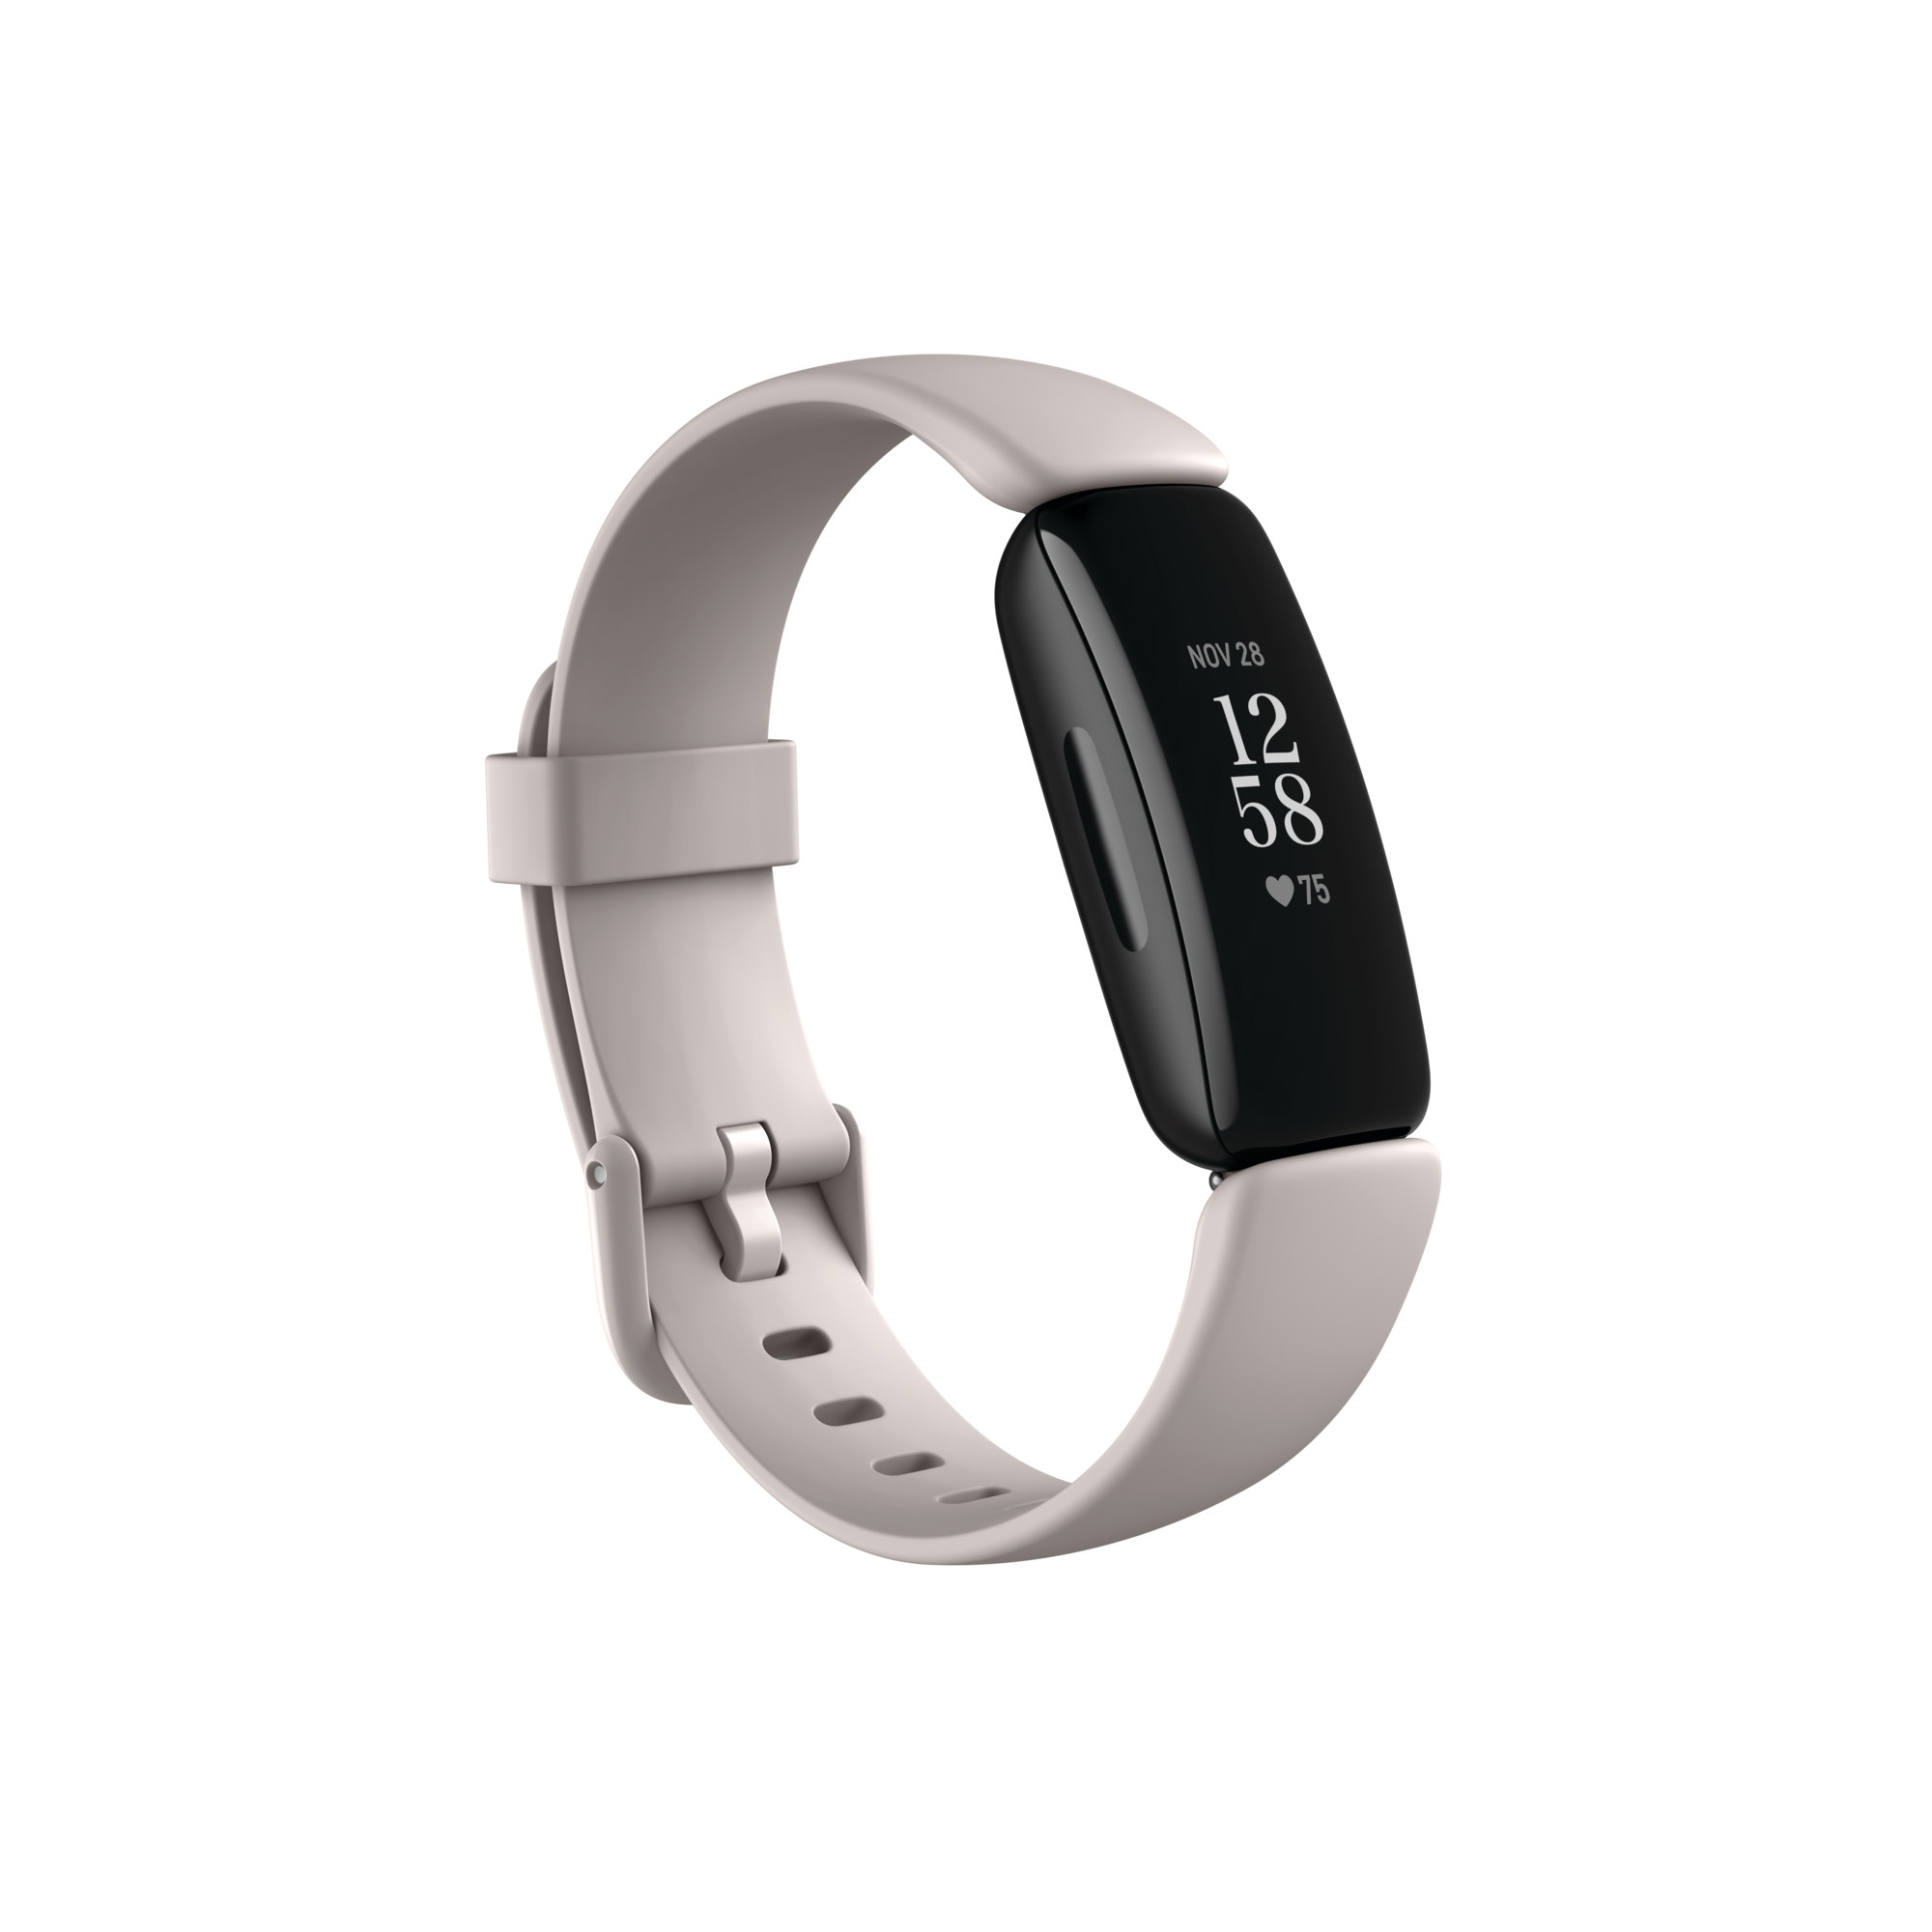 The white smart watch 